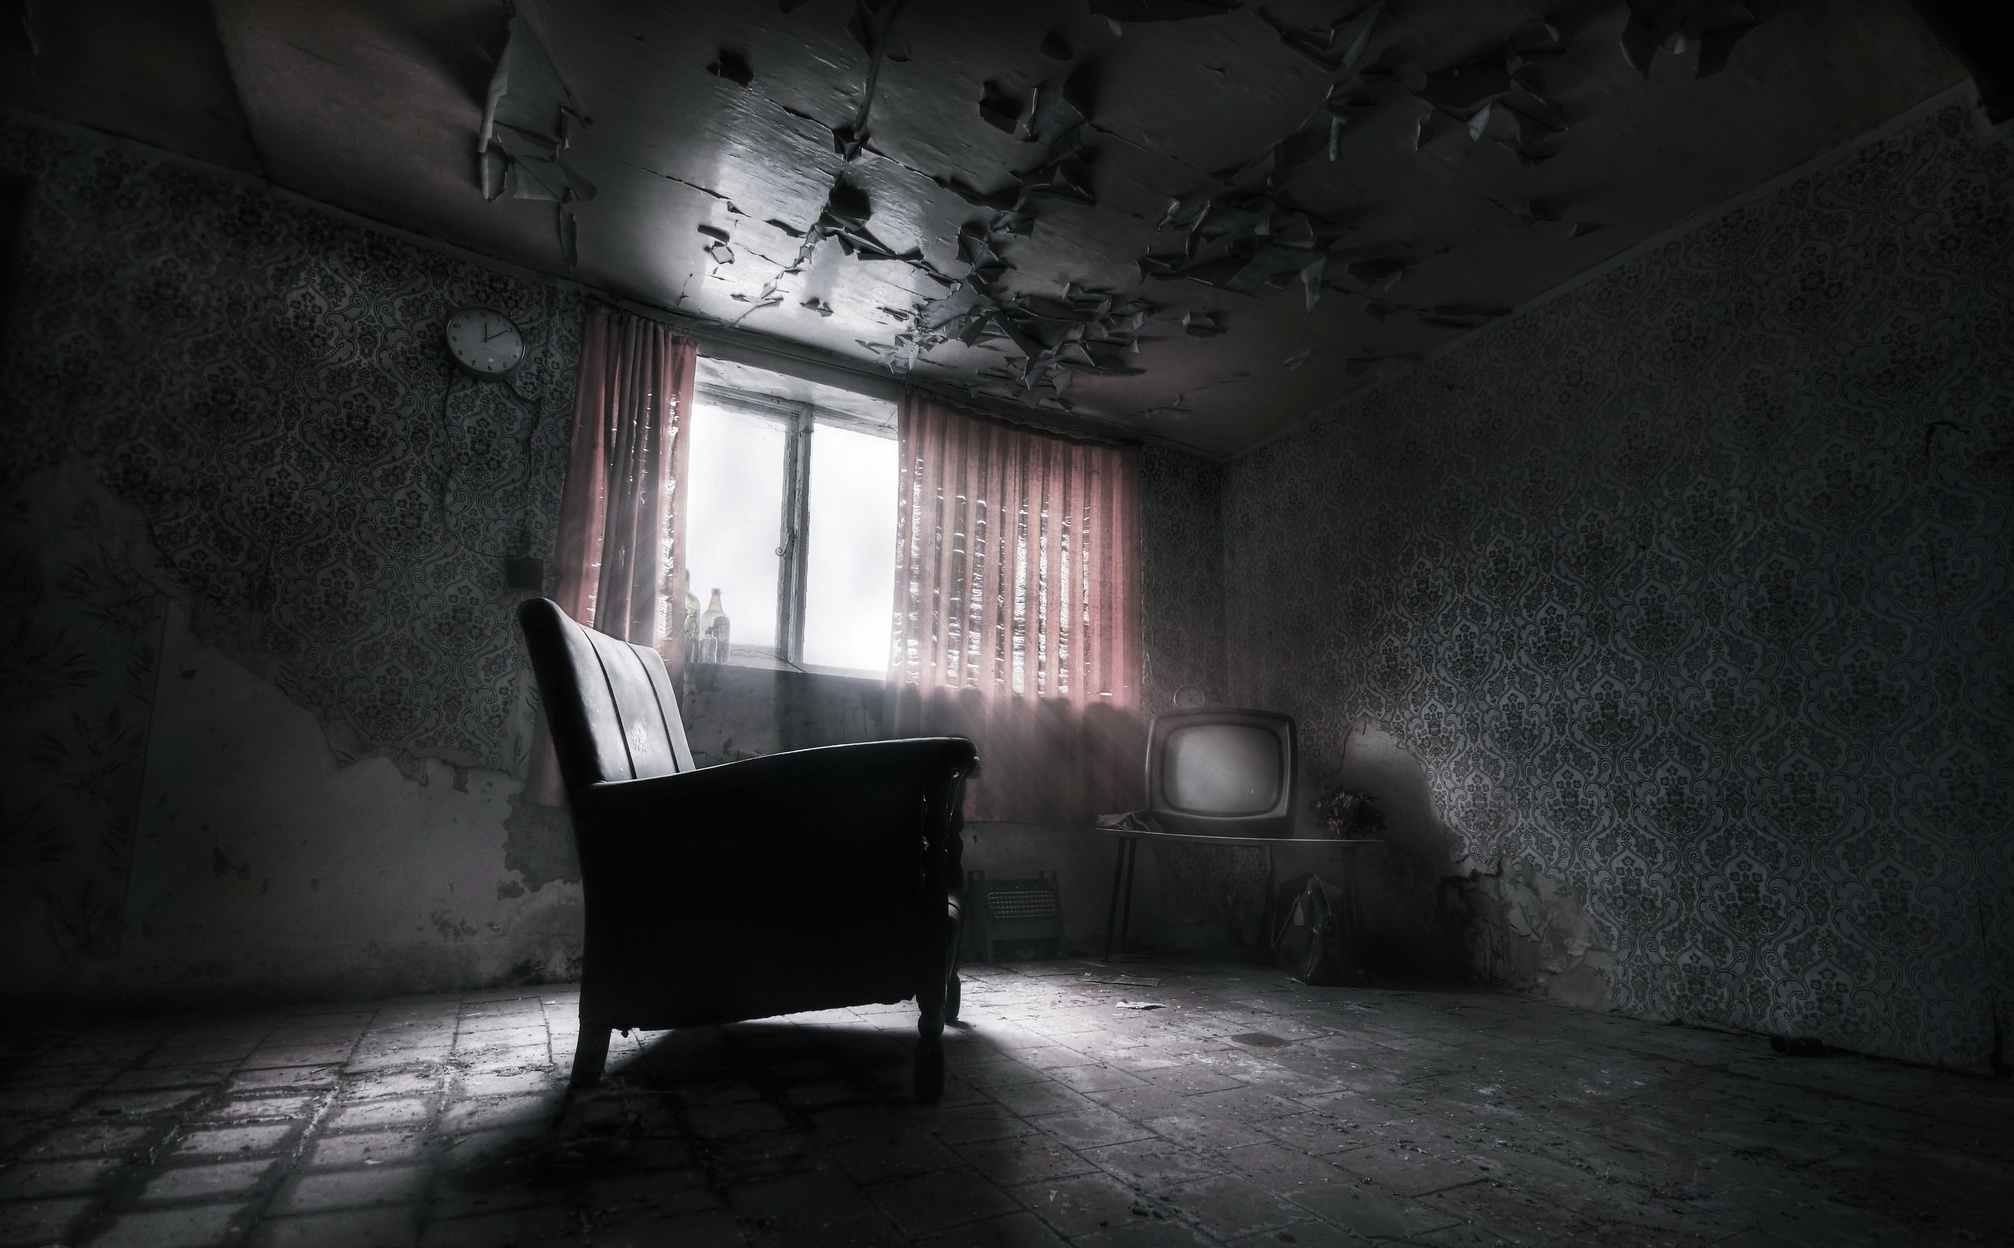 man made, room, abandoned, chair, television, window Full HD